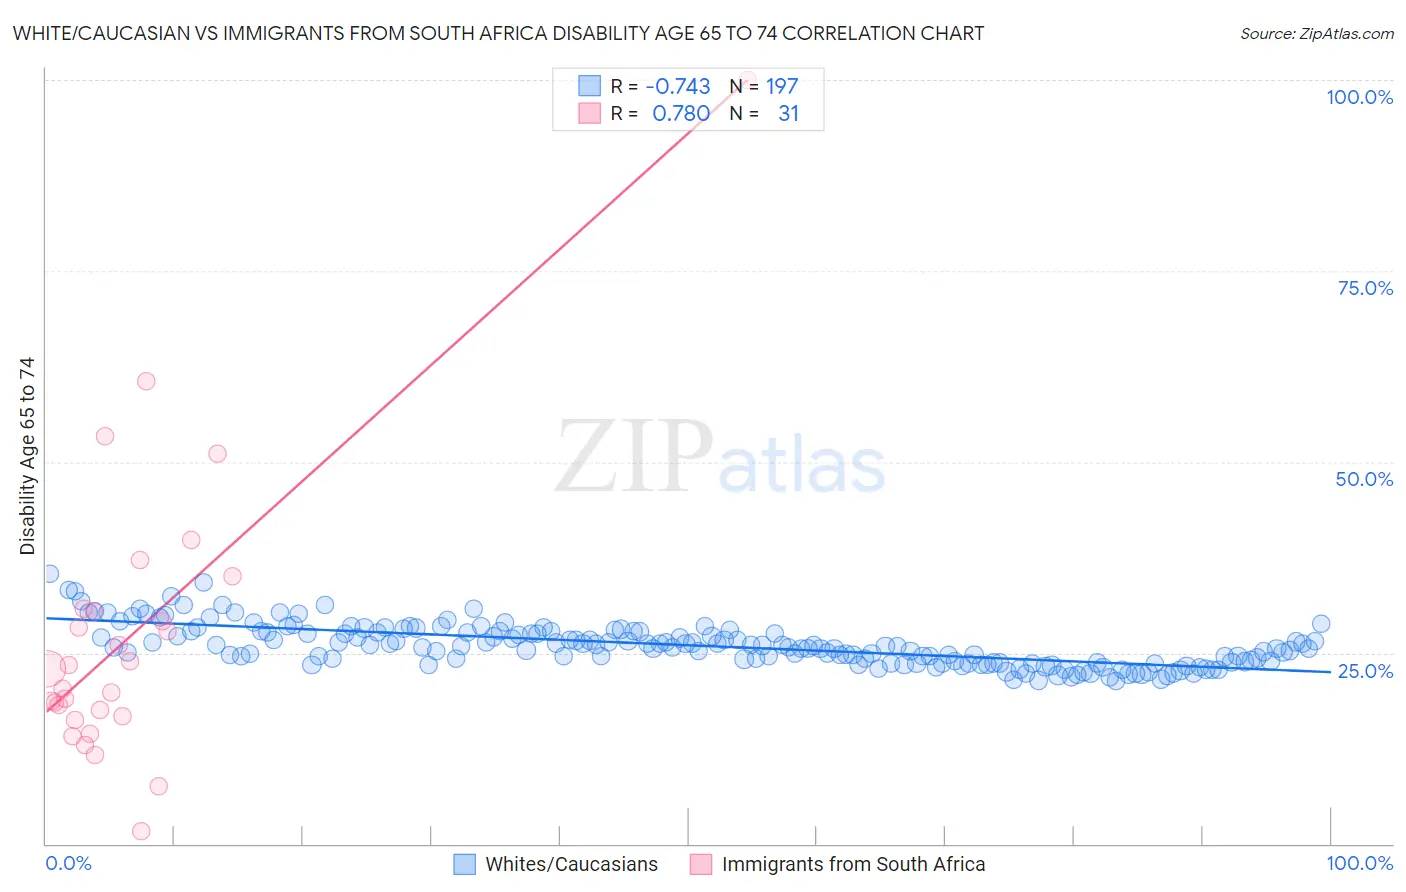 White/Caucasian vs Immigrants from South Africa Disability Age 65 to 74